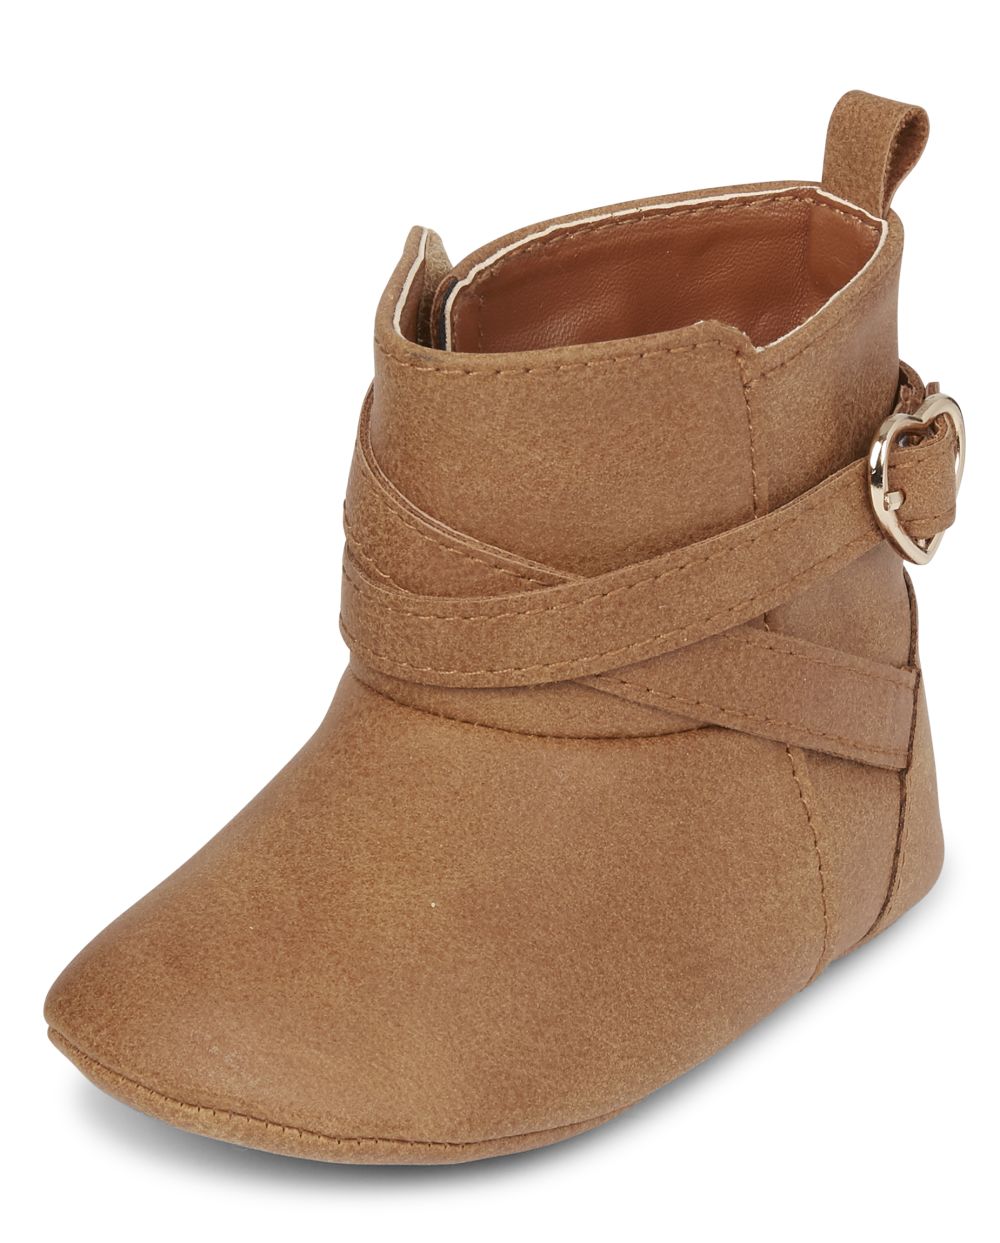 

Newborn Baby Faux Suede Heart Buckle Booties - Tan - The Children's Place